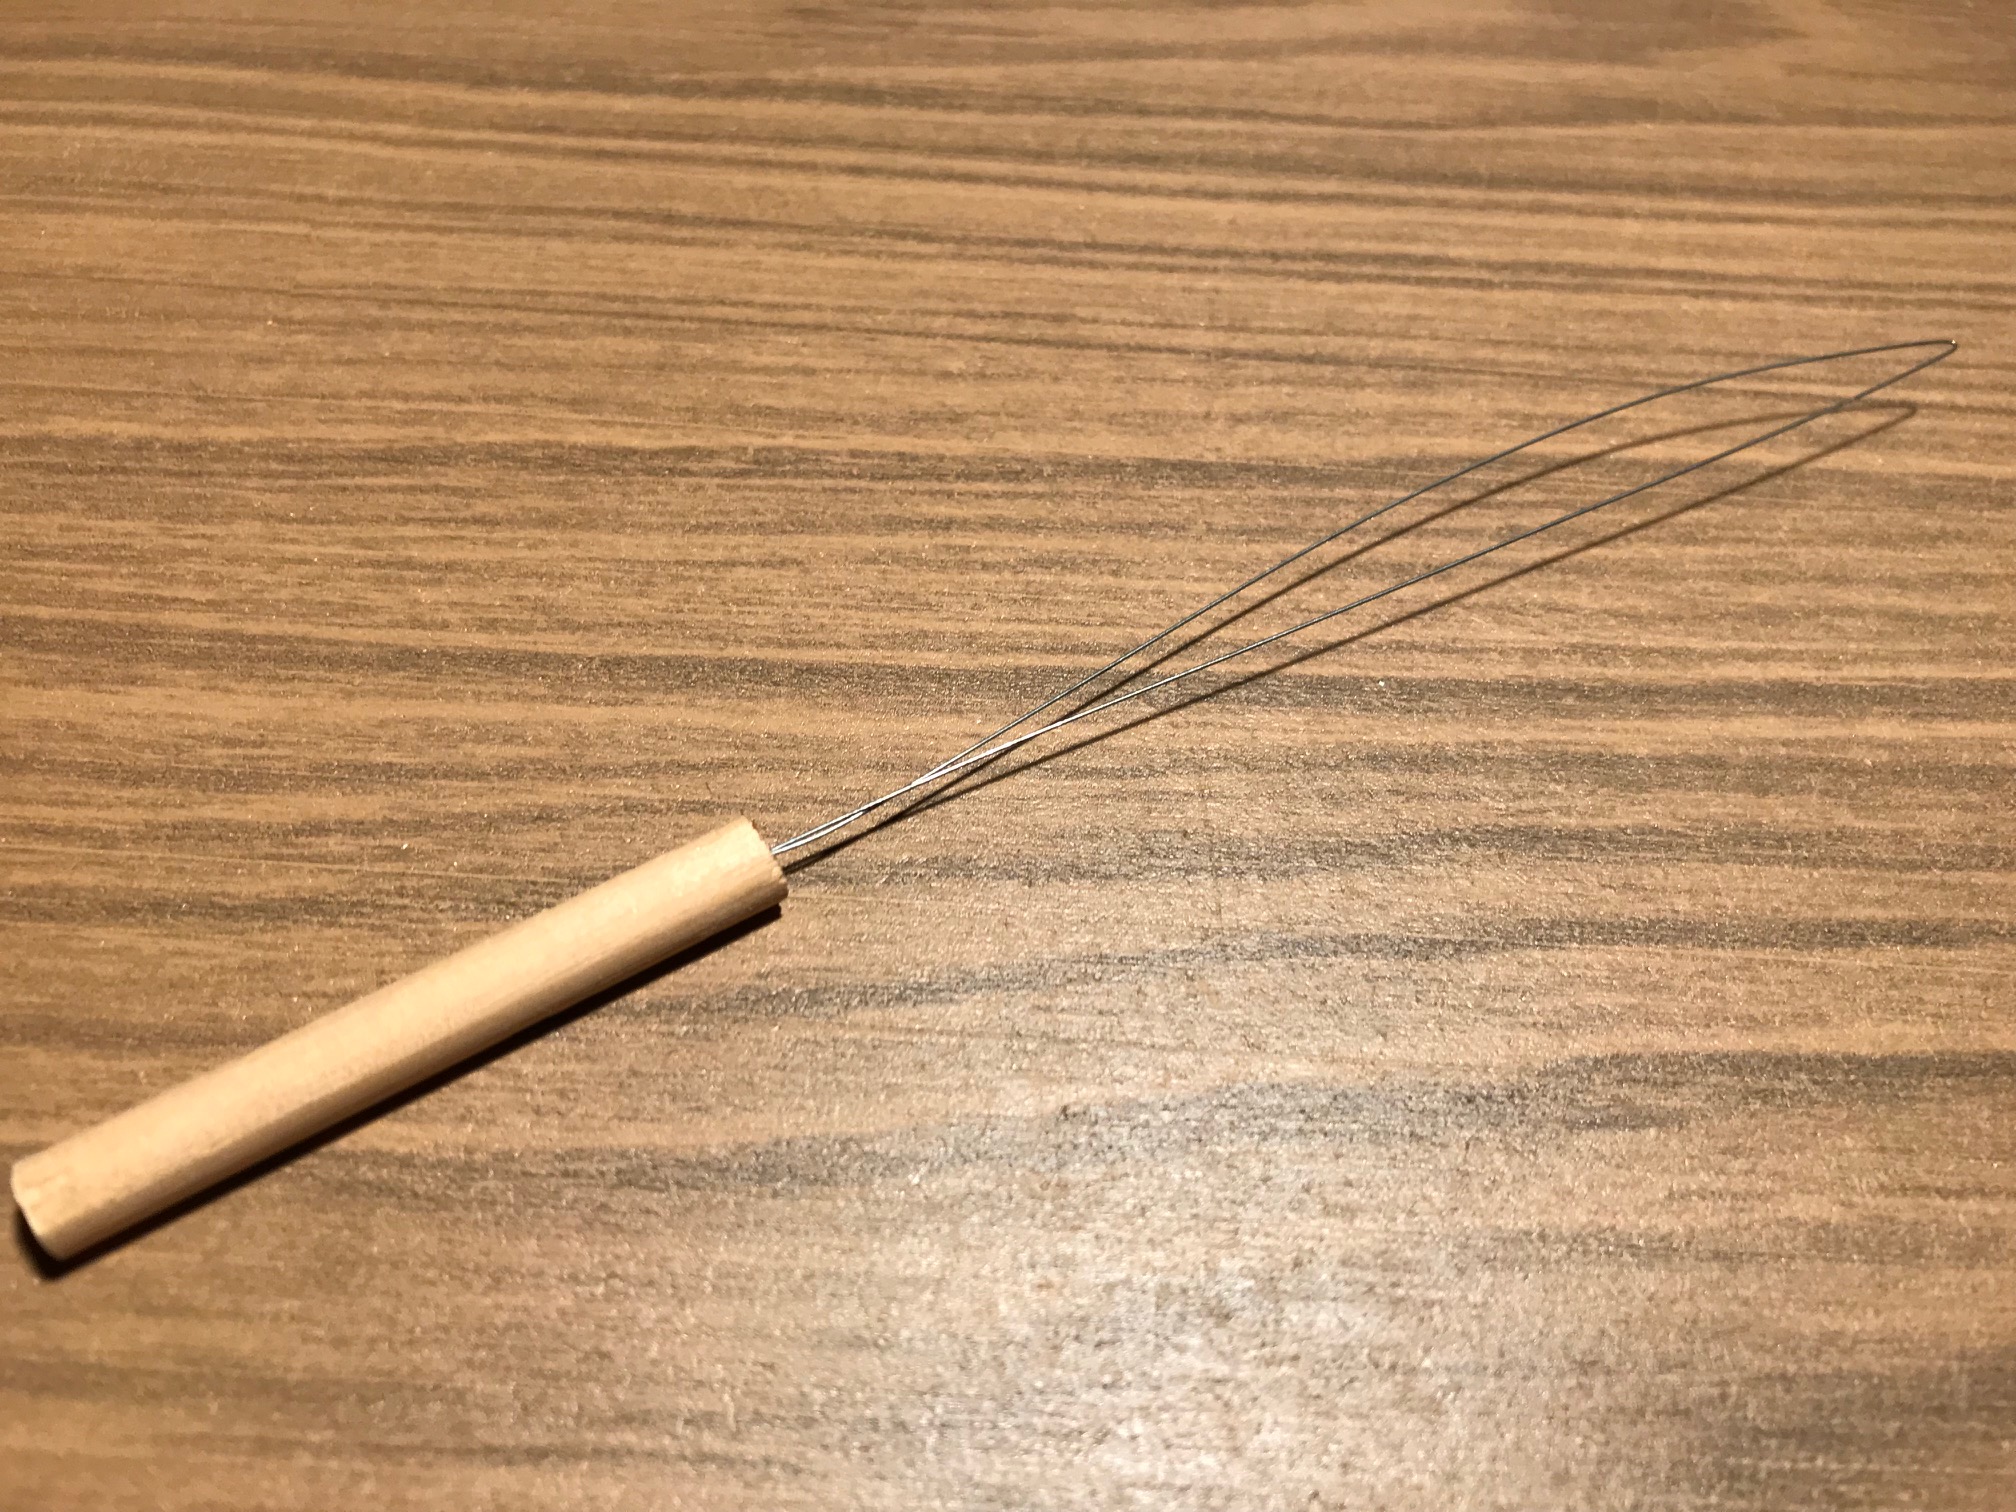 How to Make your own bobbin threader for fly fishing « Fishing